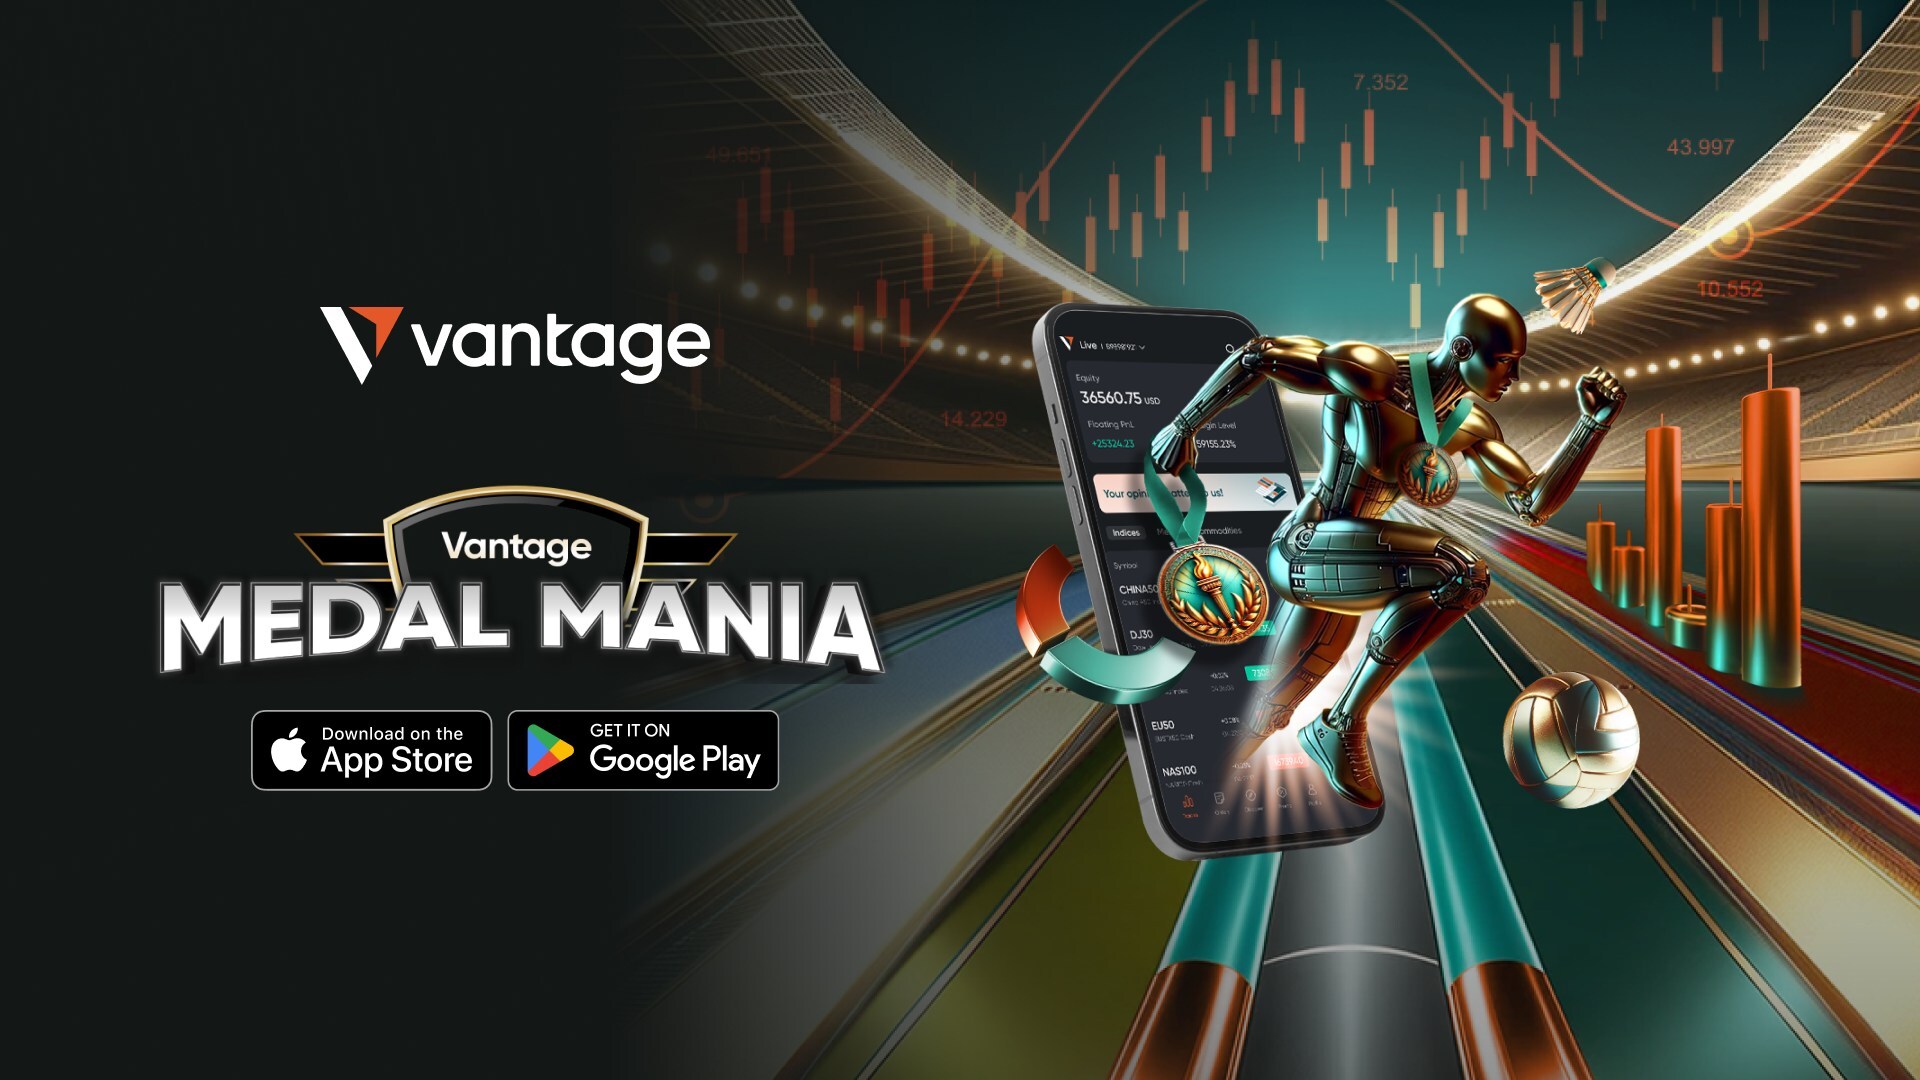 Vantage App celebrates the spirit of the Games with 